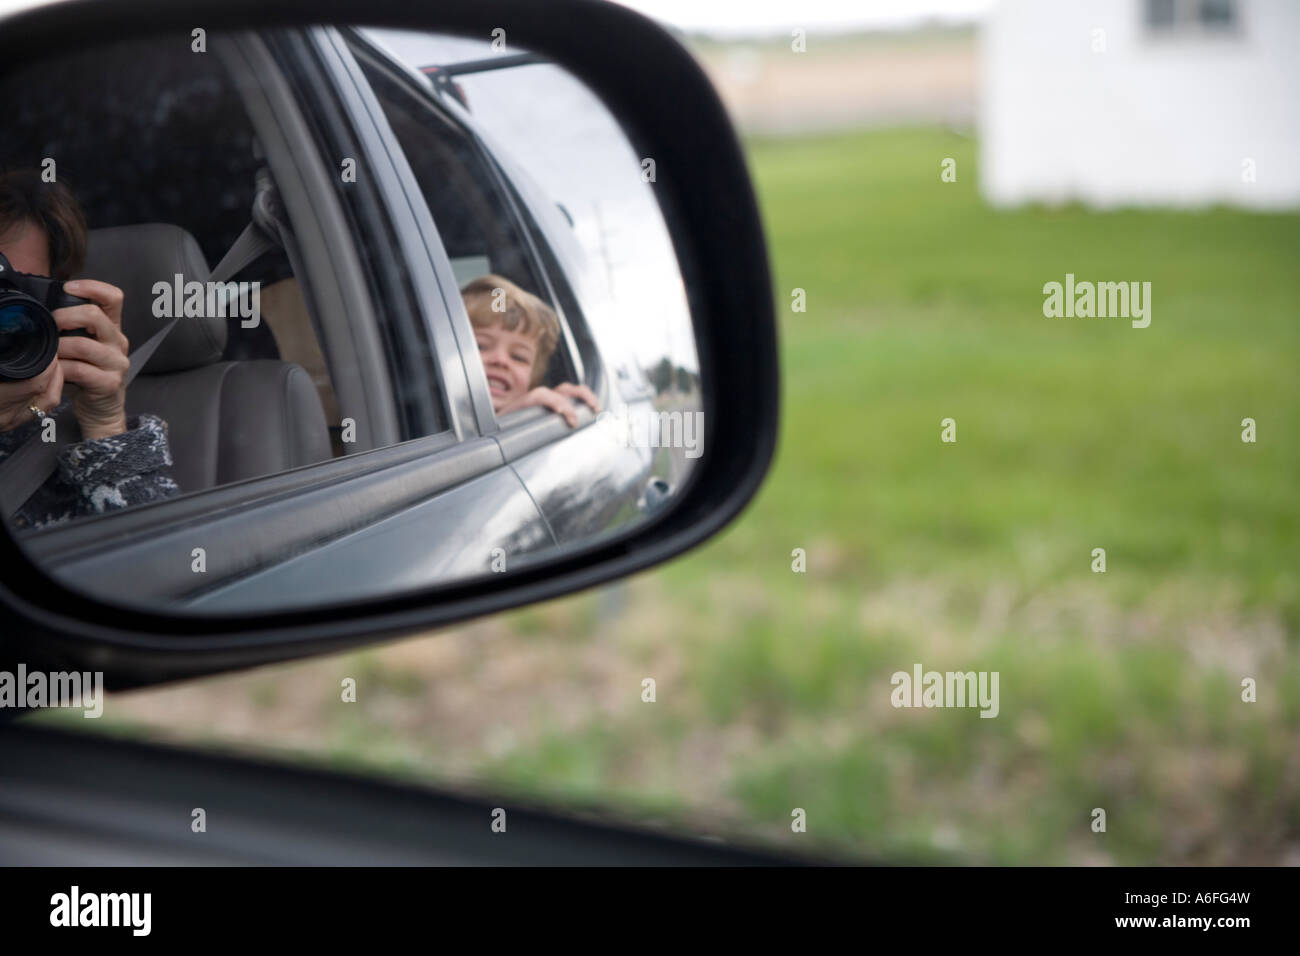 Taking photo from a car of a child in the back seat seen in rearview mirror Stock Photo